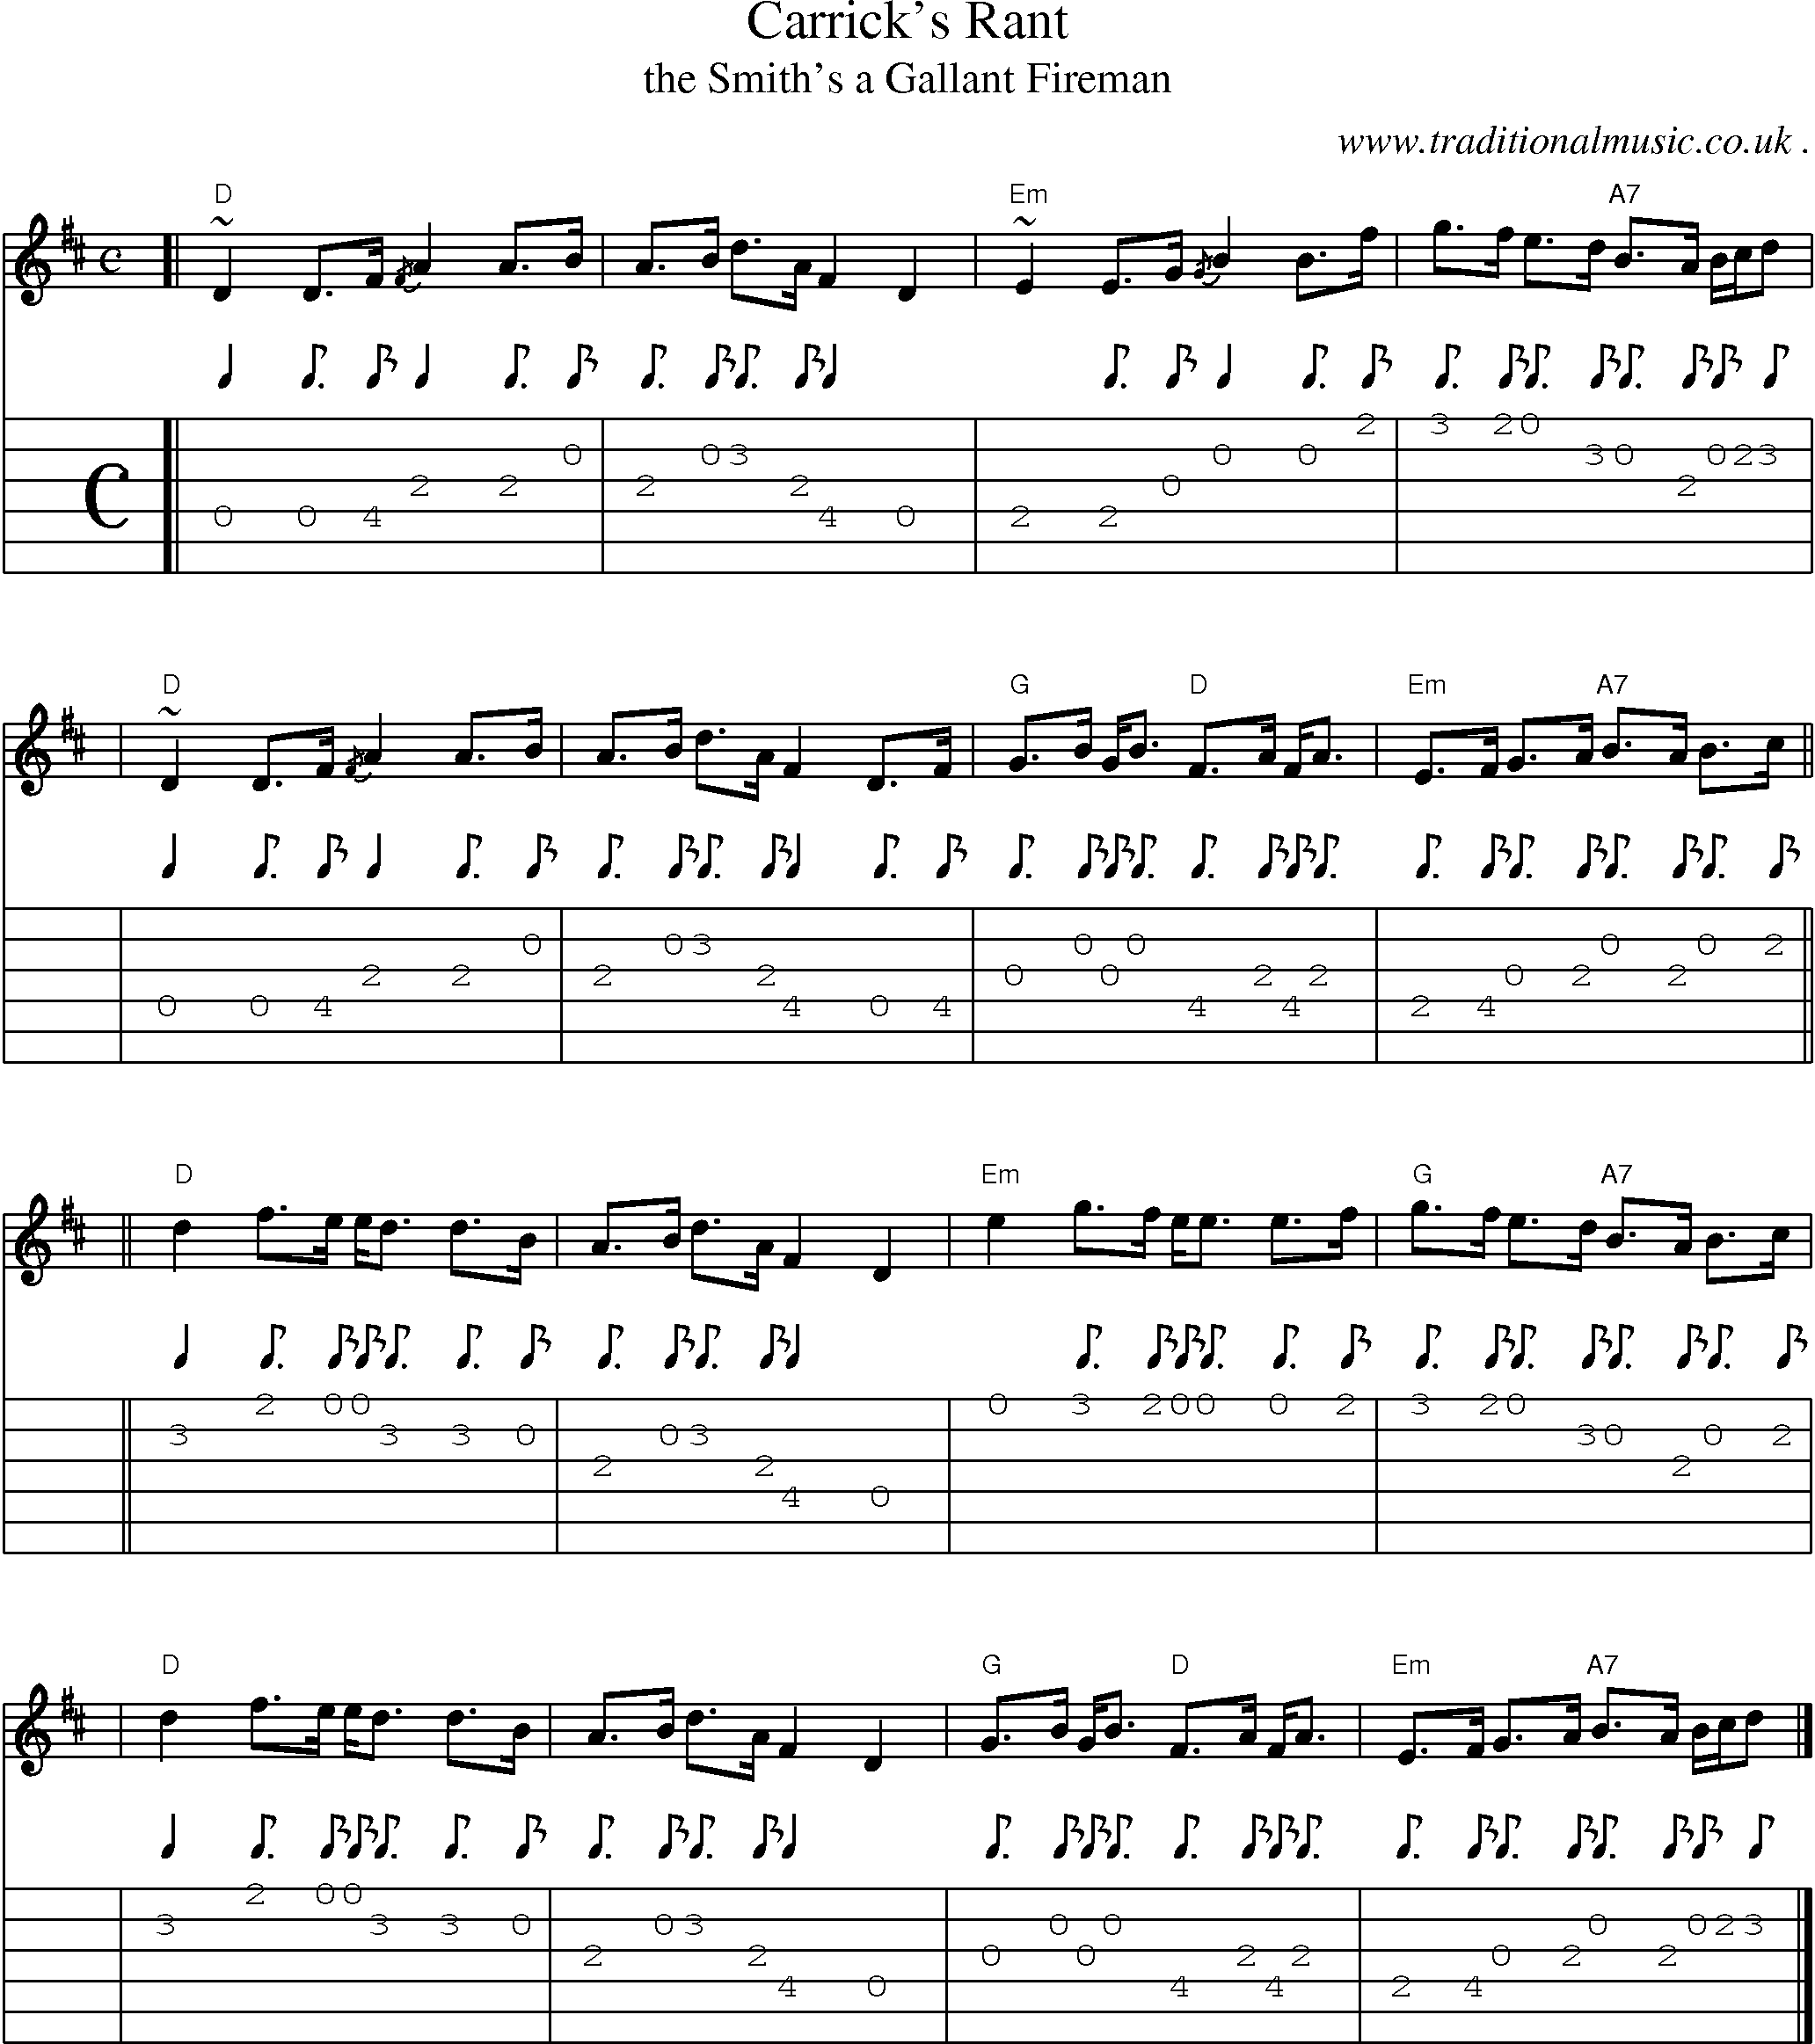 Sheet-music  score, Chords and Guitar Tabs for Carricks Rant